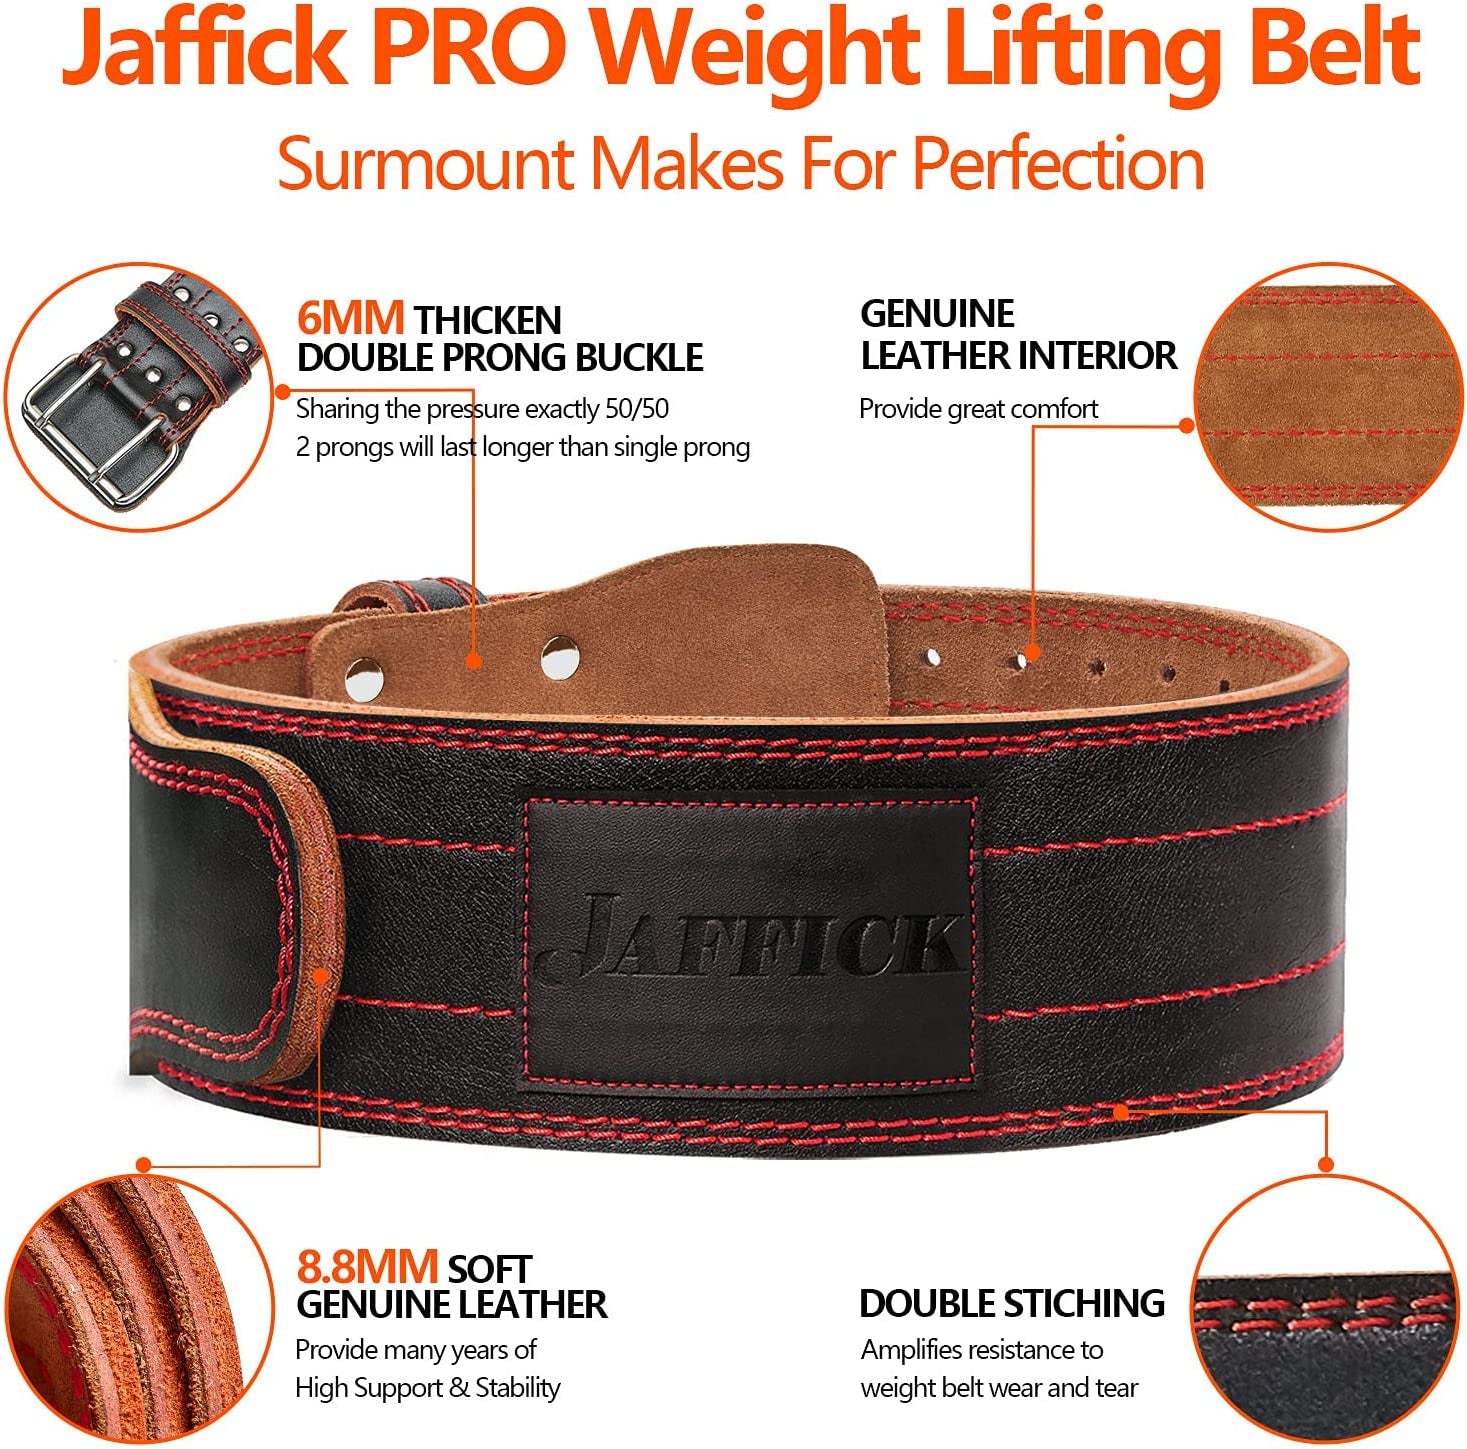 Genuine Leather Weight Lifting Belt (4 Inches Wide) Lower Back Support and Injury Prevention for Gym Fitness Workout Cross Training for Men Women - Squat Deadlift up to 800 Lbs